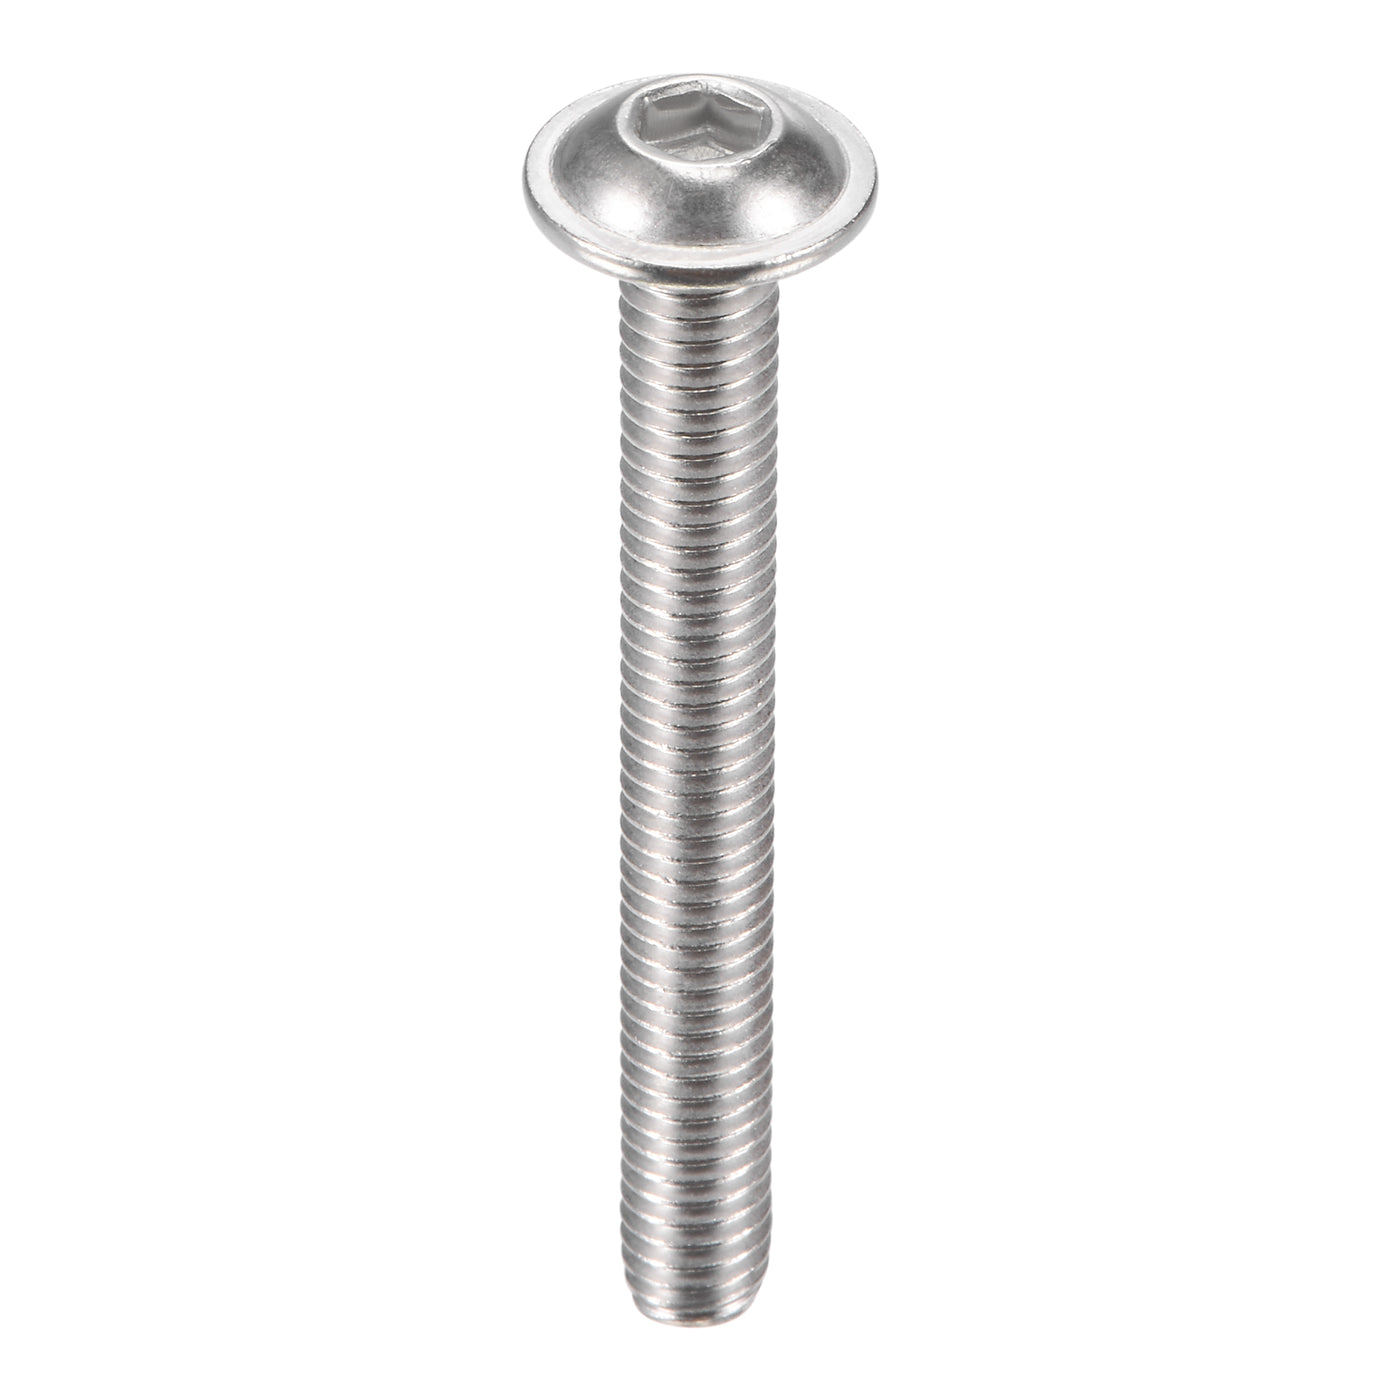 Uxcell Uxcell M8x65mm 304 Stainless Steel Flanged Button Head Socket Cap Screws 10pcs